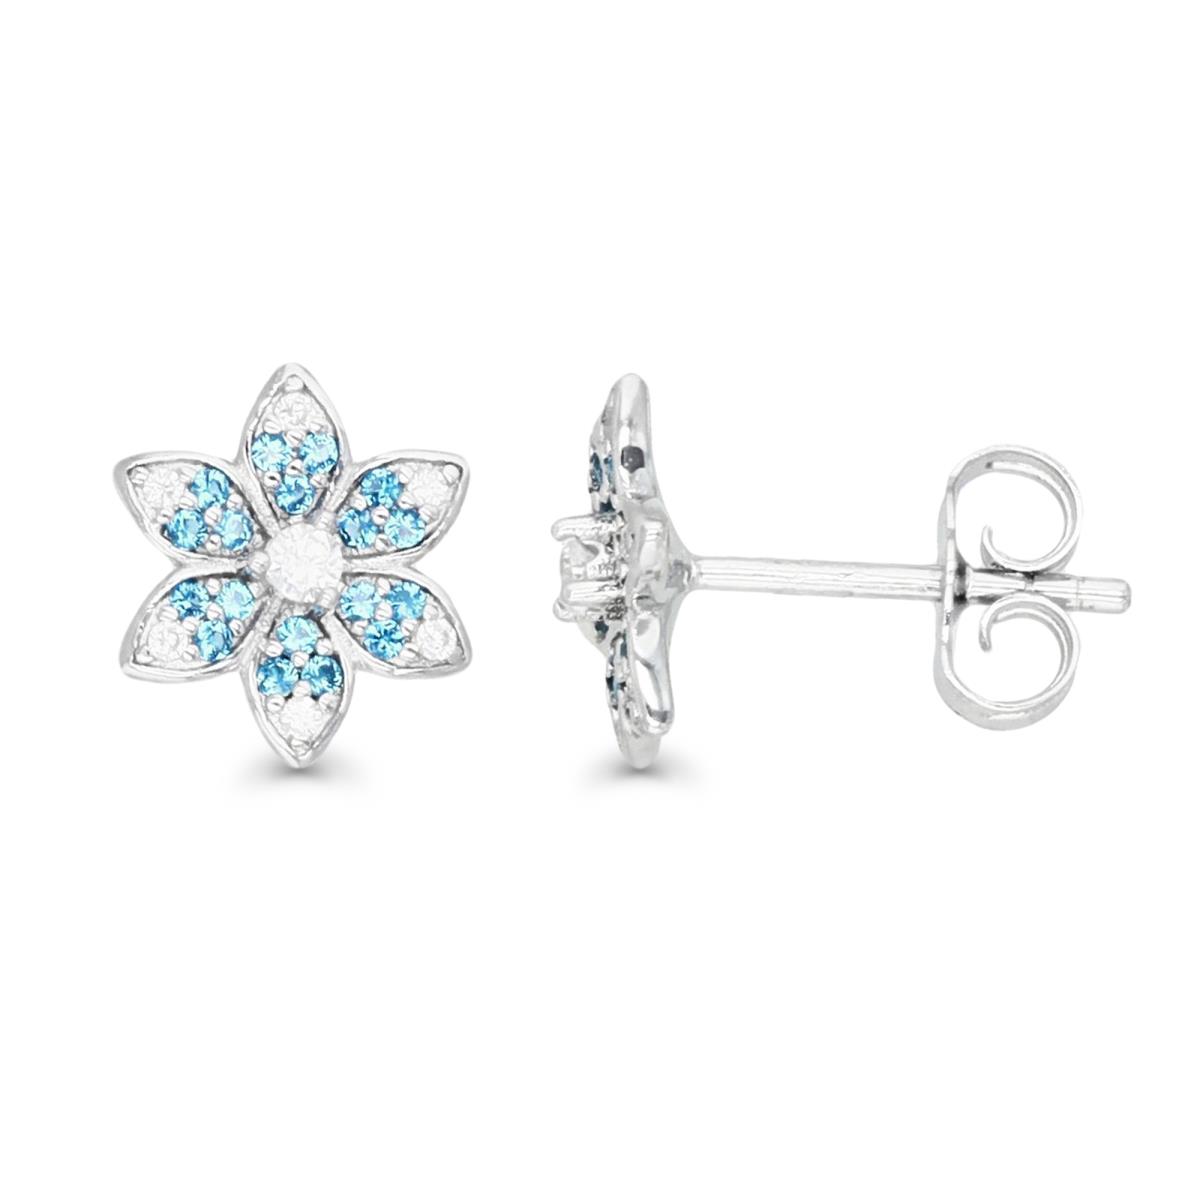 Sterling Silver Rhodium & Cr. Spinel #136 and White CZ Small Flower Stud Earring